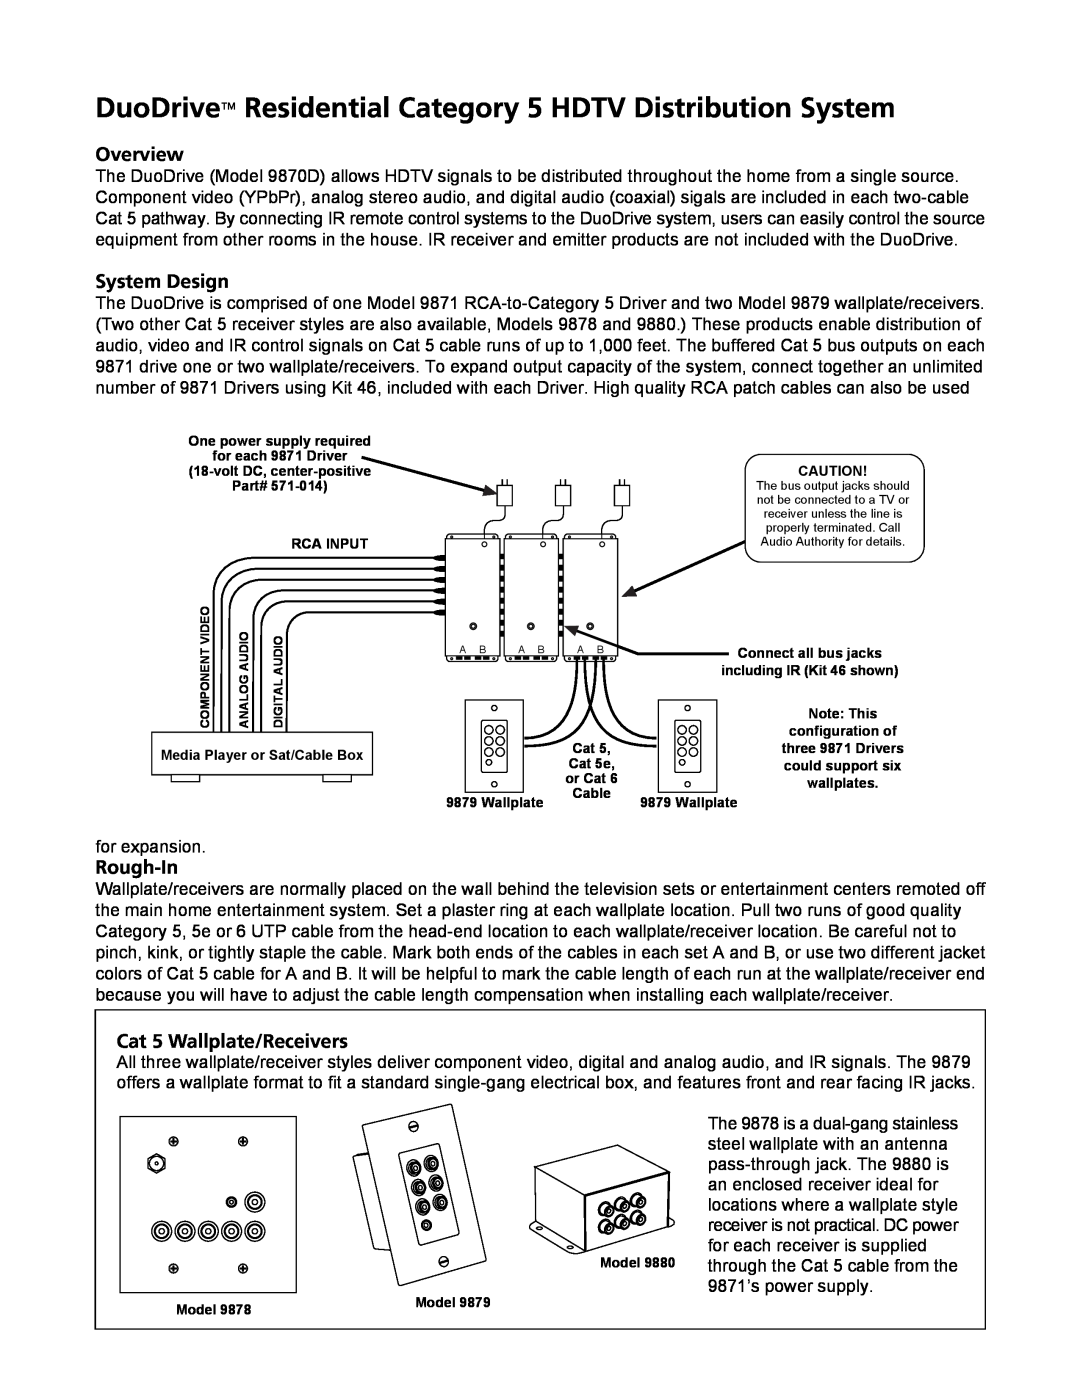 Audio Authority 9879, 9870D user manual Overview, System Design, Rough-In, Cat 5 Wallplate/Receivers 